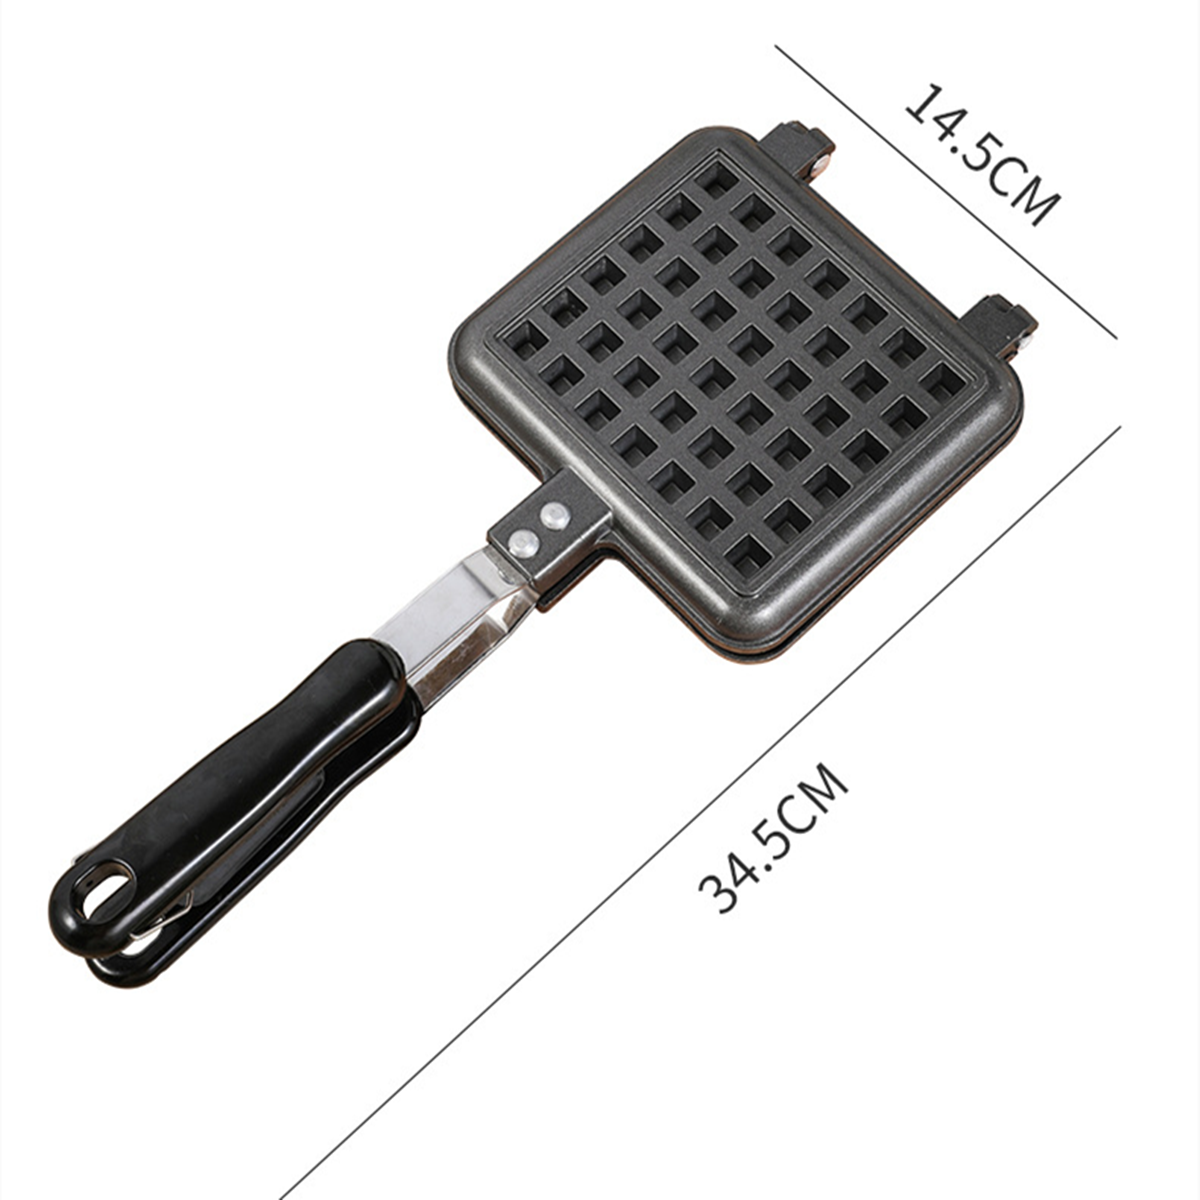 Sandwich Maker Double-Side Non-Stick Bread Toast Breakfast Machine Waffle Pancake Baking Barbecue Oven Mold Grill Frying Pan